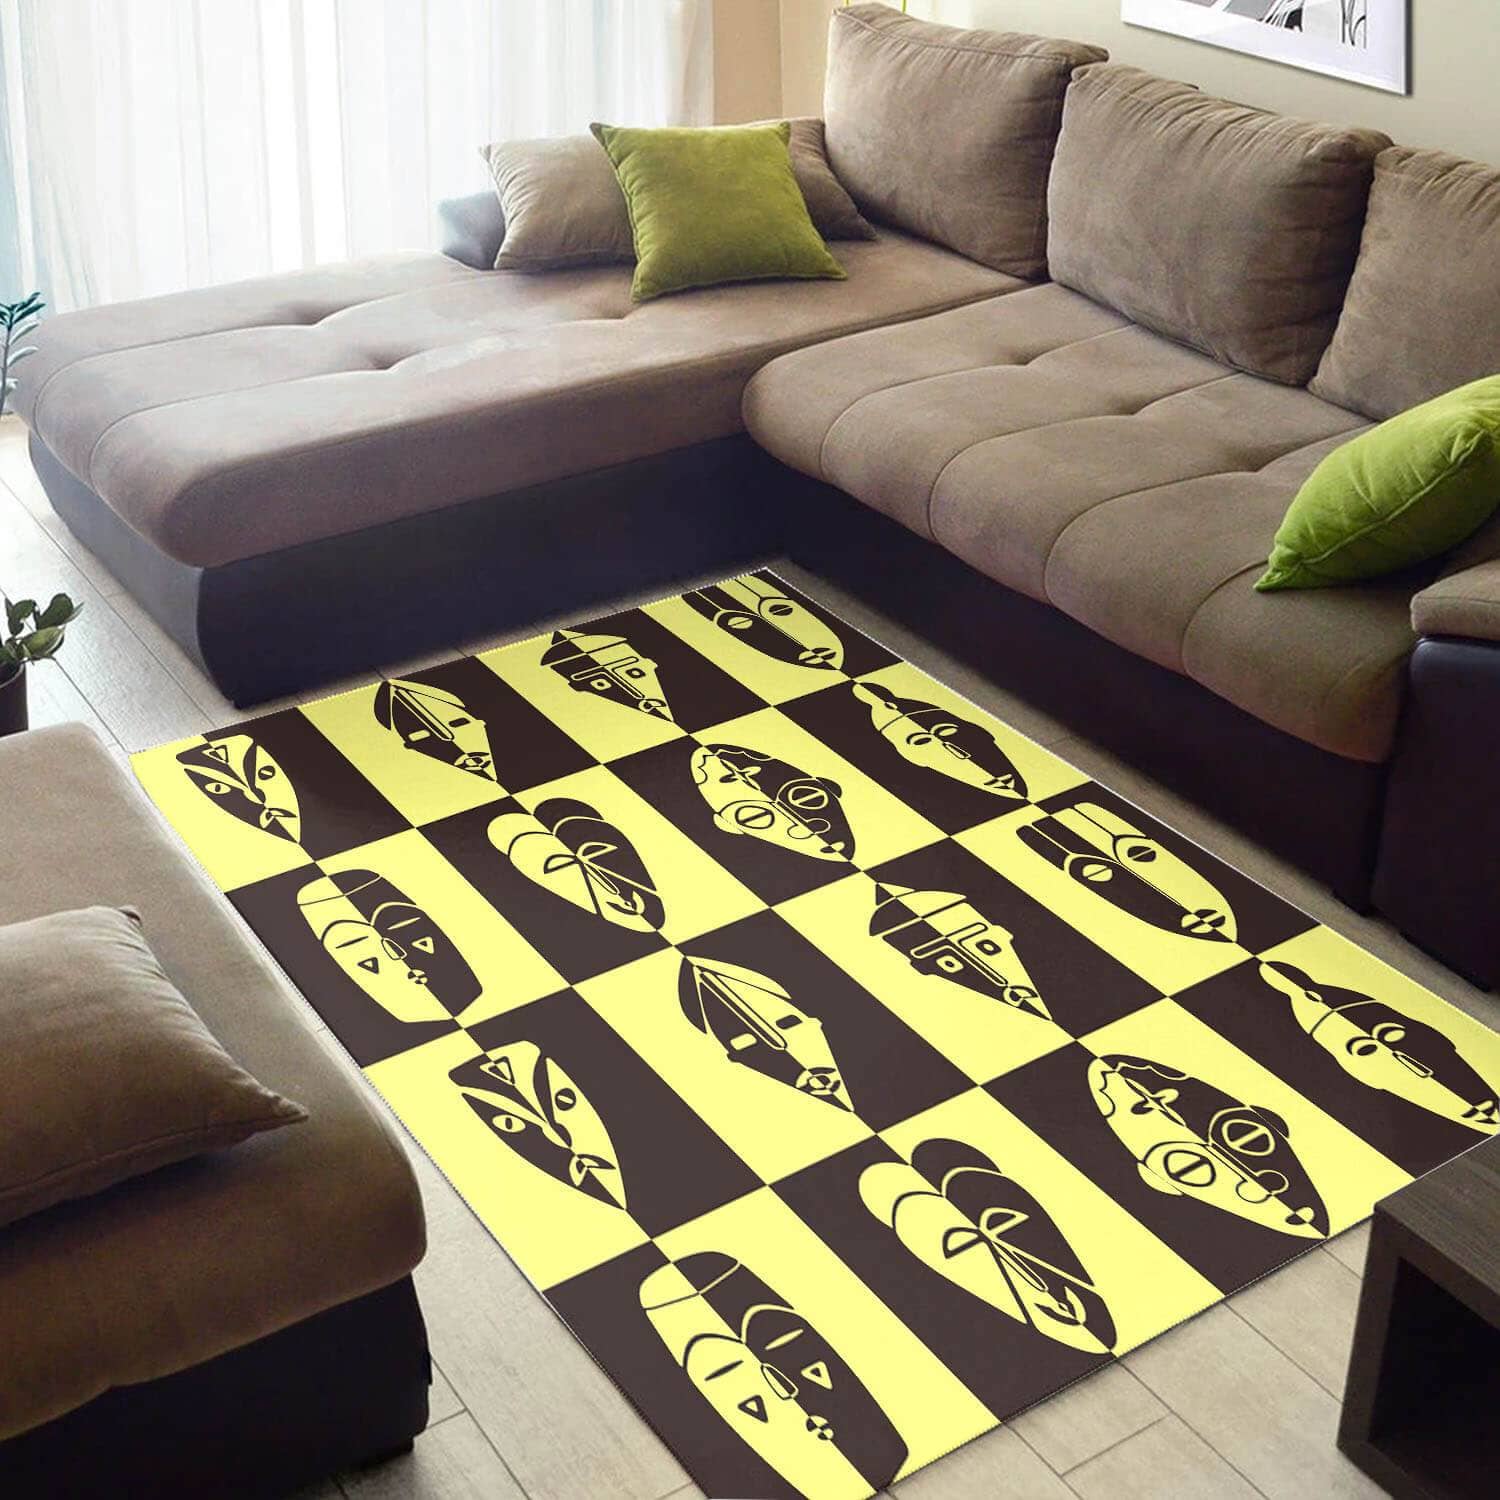 Trendy African American Graphic Art Afrocentric Pattern Themed Carpet Room Rug